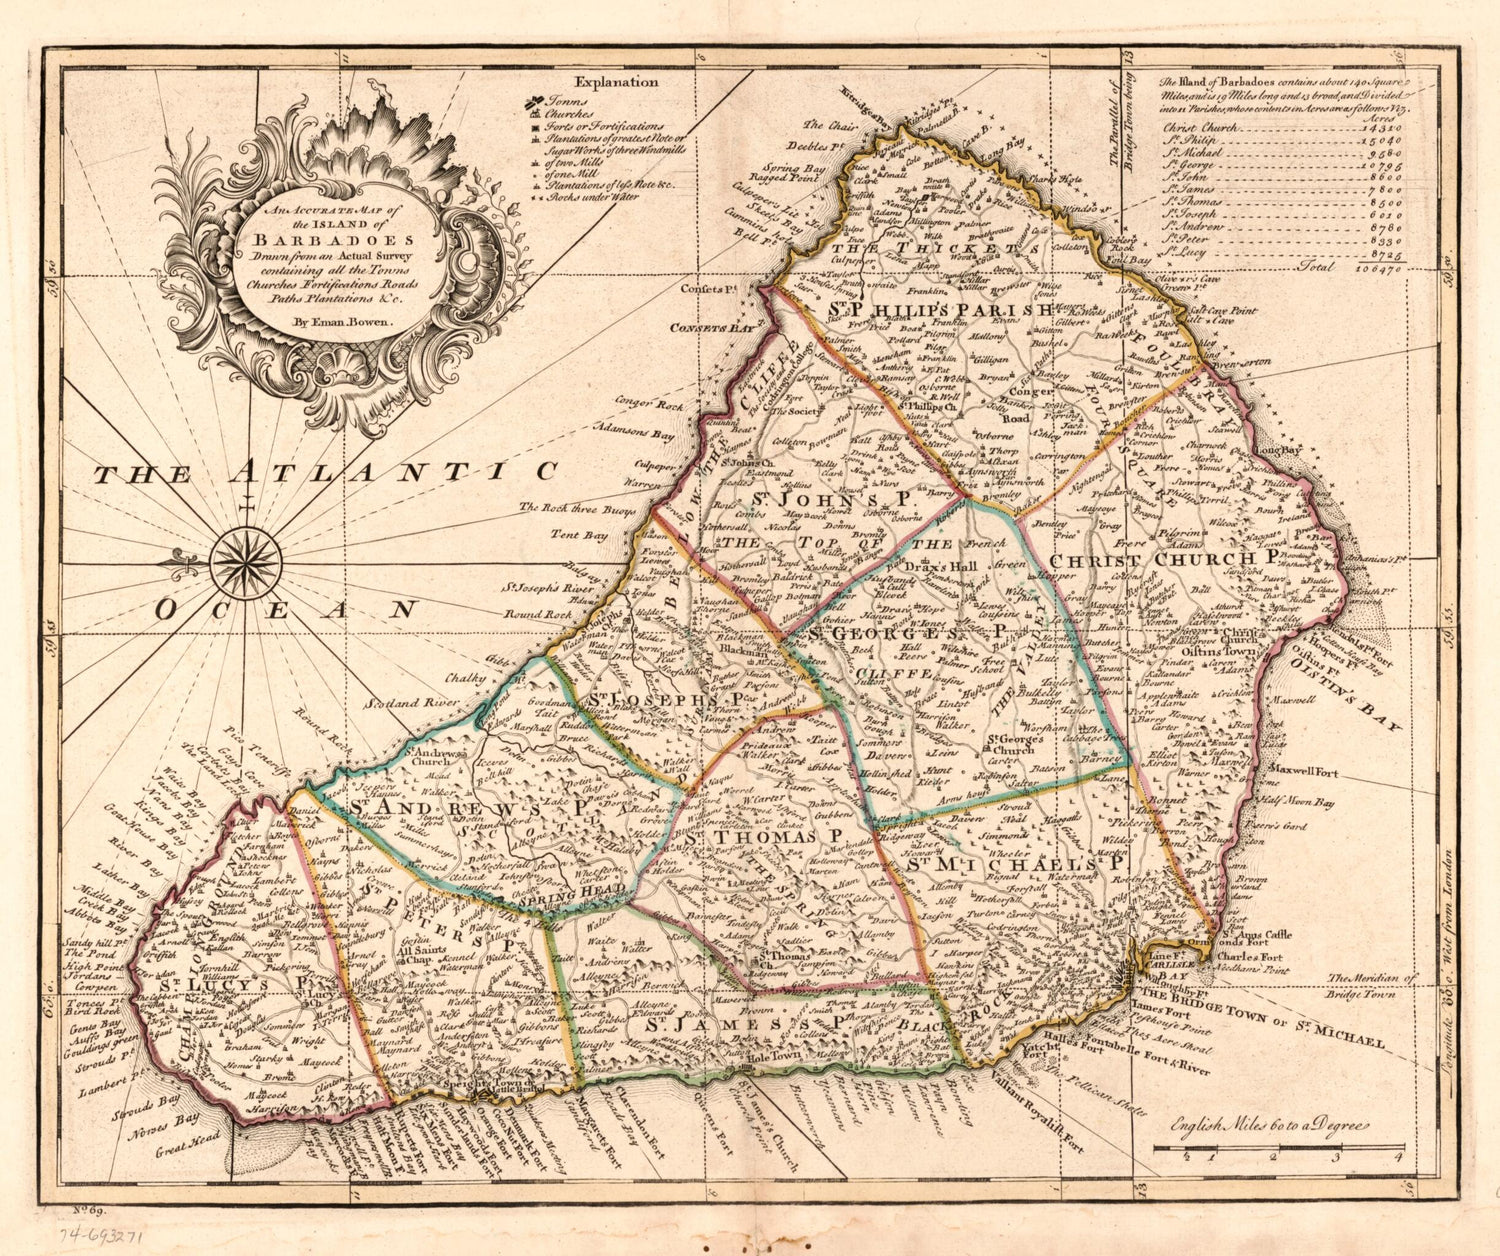 This old map of An Accurate Map of the Island of Barbadoes. Drawn from an Actual Survey Containing All the Towns, Churches, Fortifications, Roads, Paths, Plantations, &amp;c from 1752 was created by Emanuel Bowen in 1752